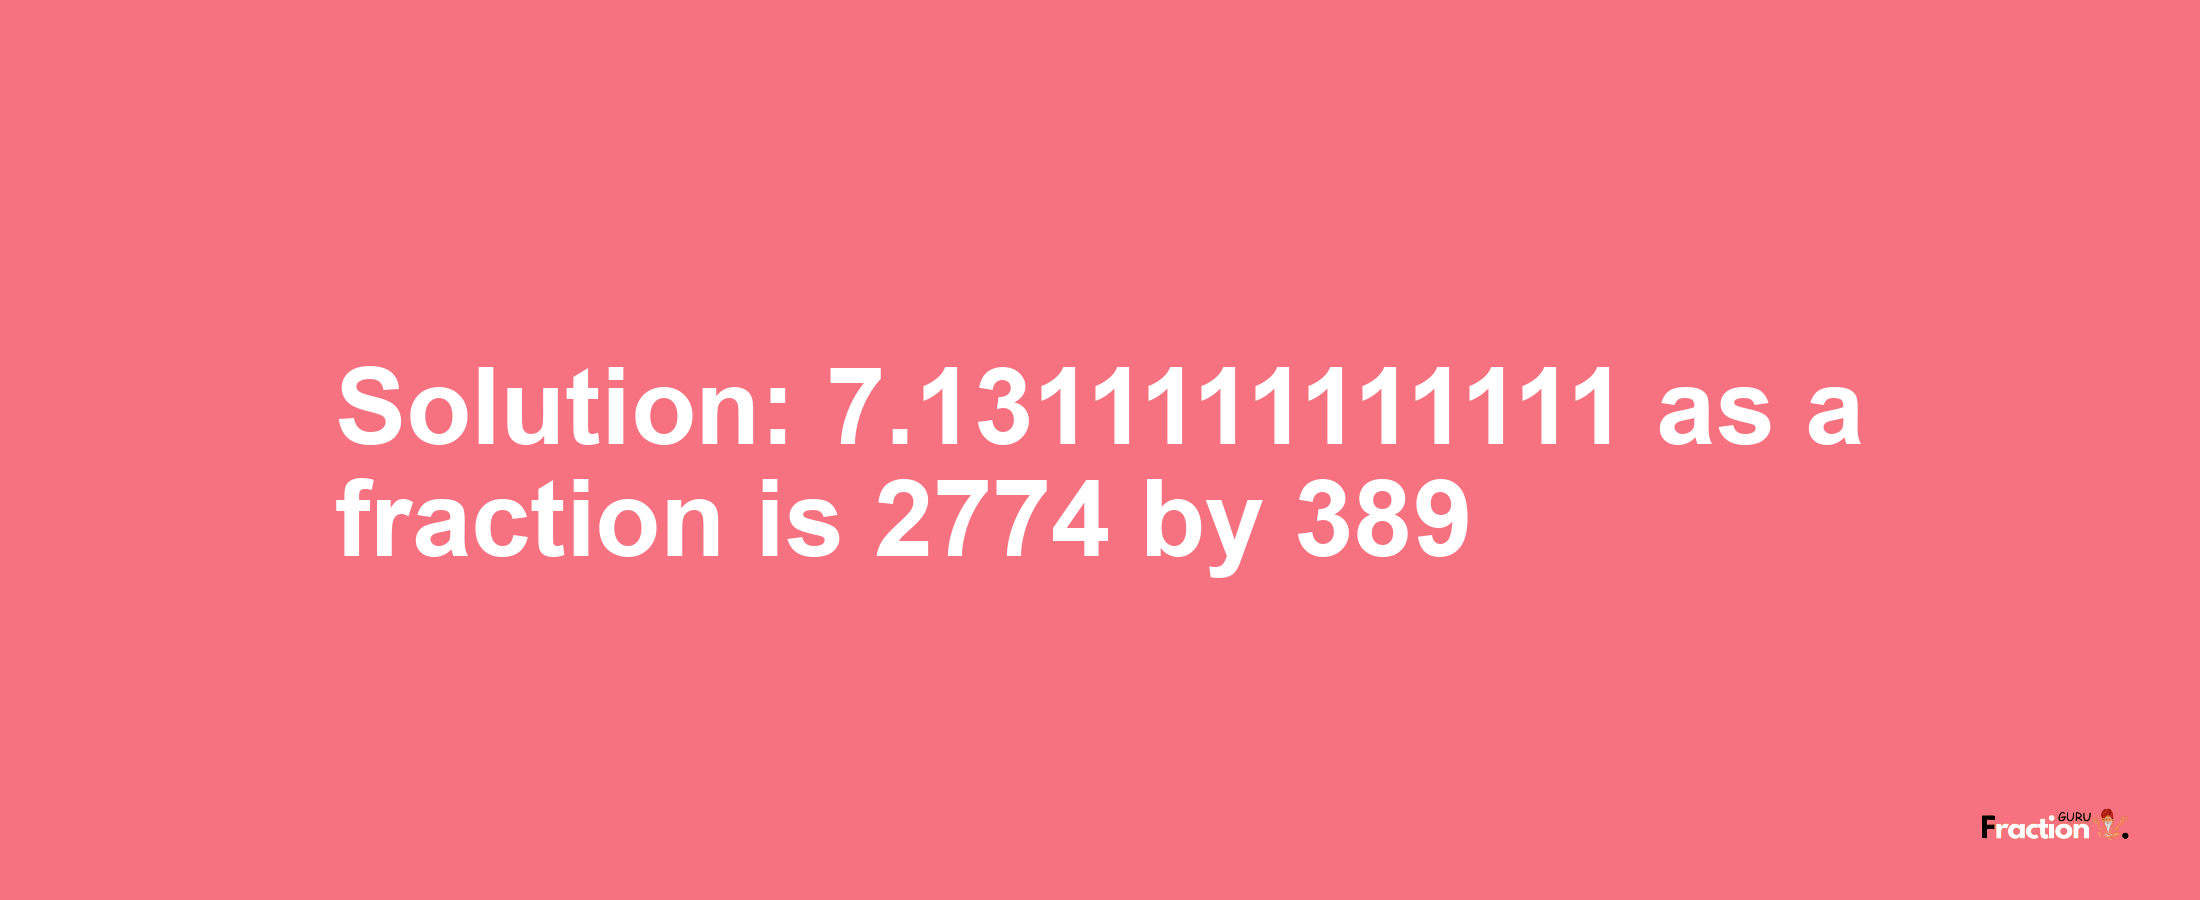 Solution:7.1311111111111 as a fraction is 2774/389